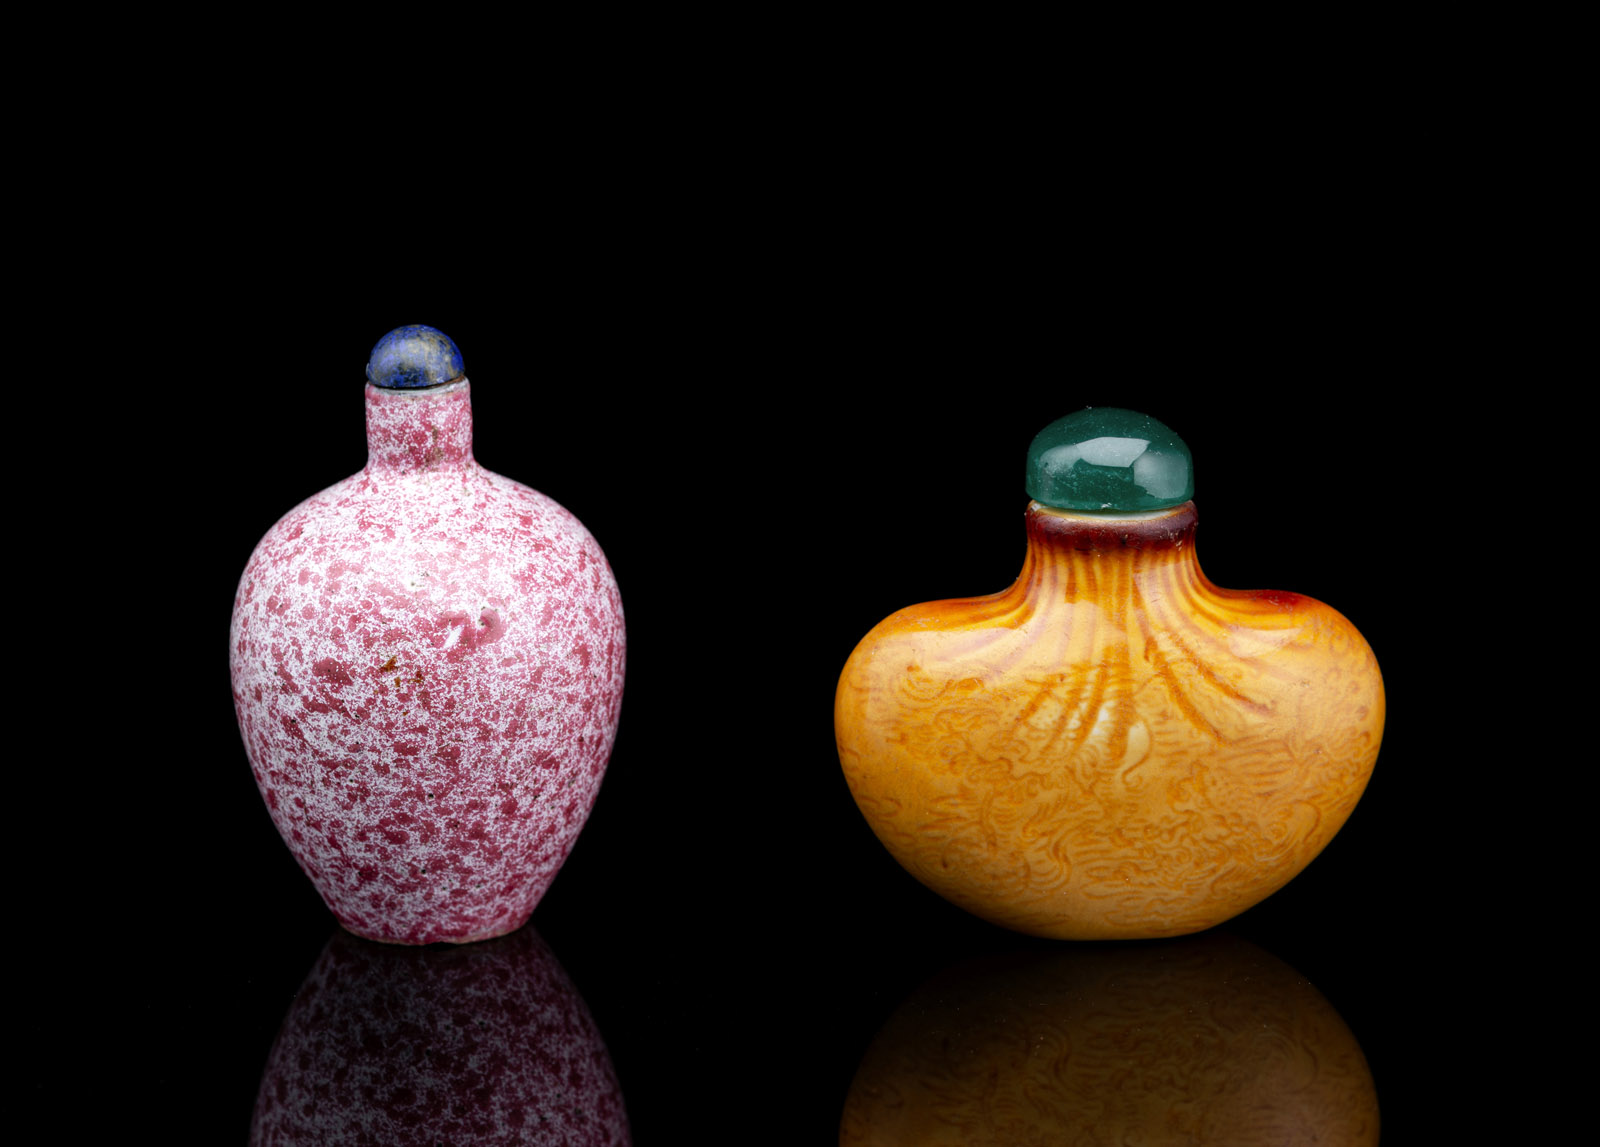 <b>A WHITE AND PURPLE SPLASHED PORCELAIN SNUFFBOTTLE AND A YELLOW-GLAZED POUCH-SHAPED ENGRAVED PORCELAIN SNUFFBOTTLE</b>